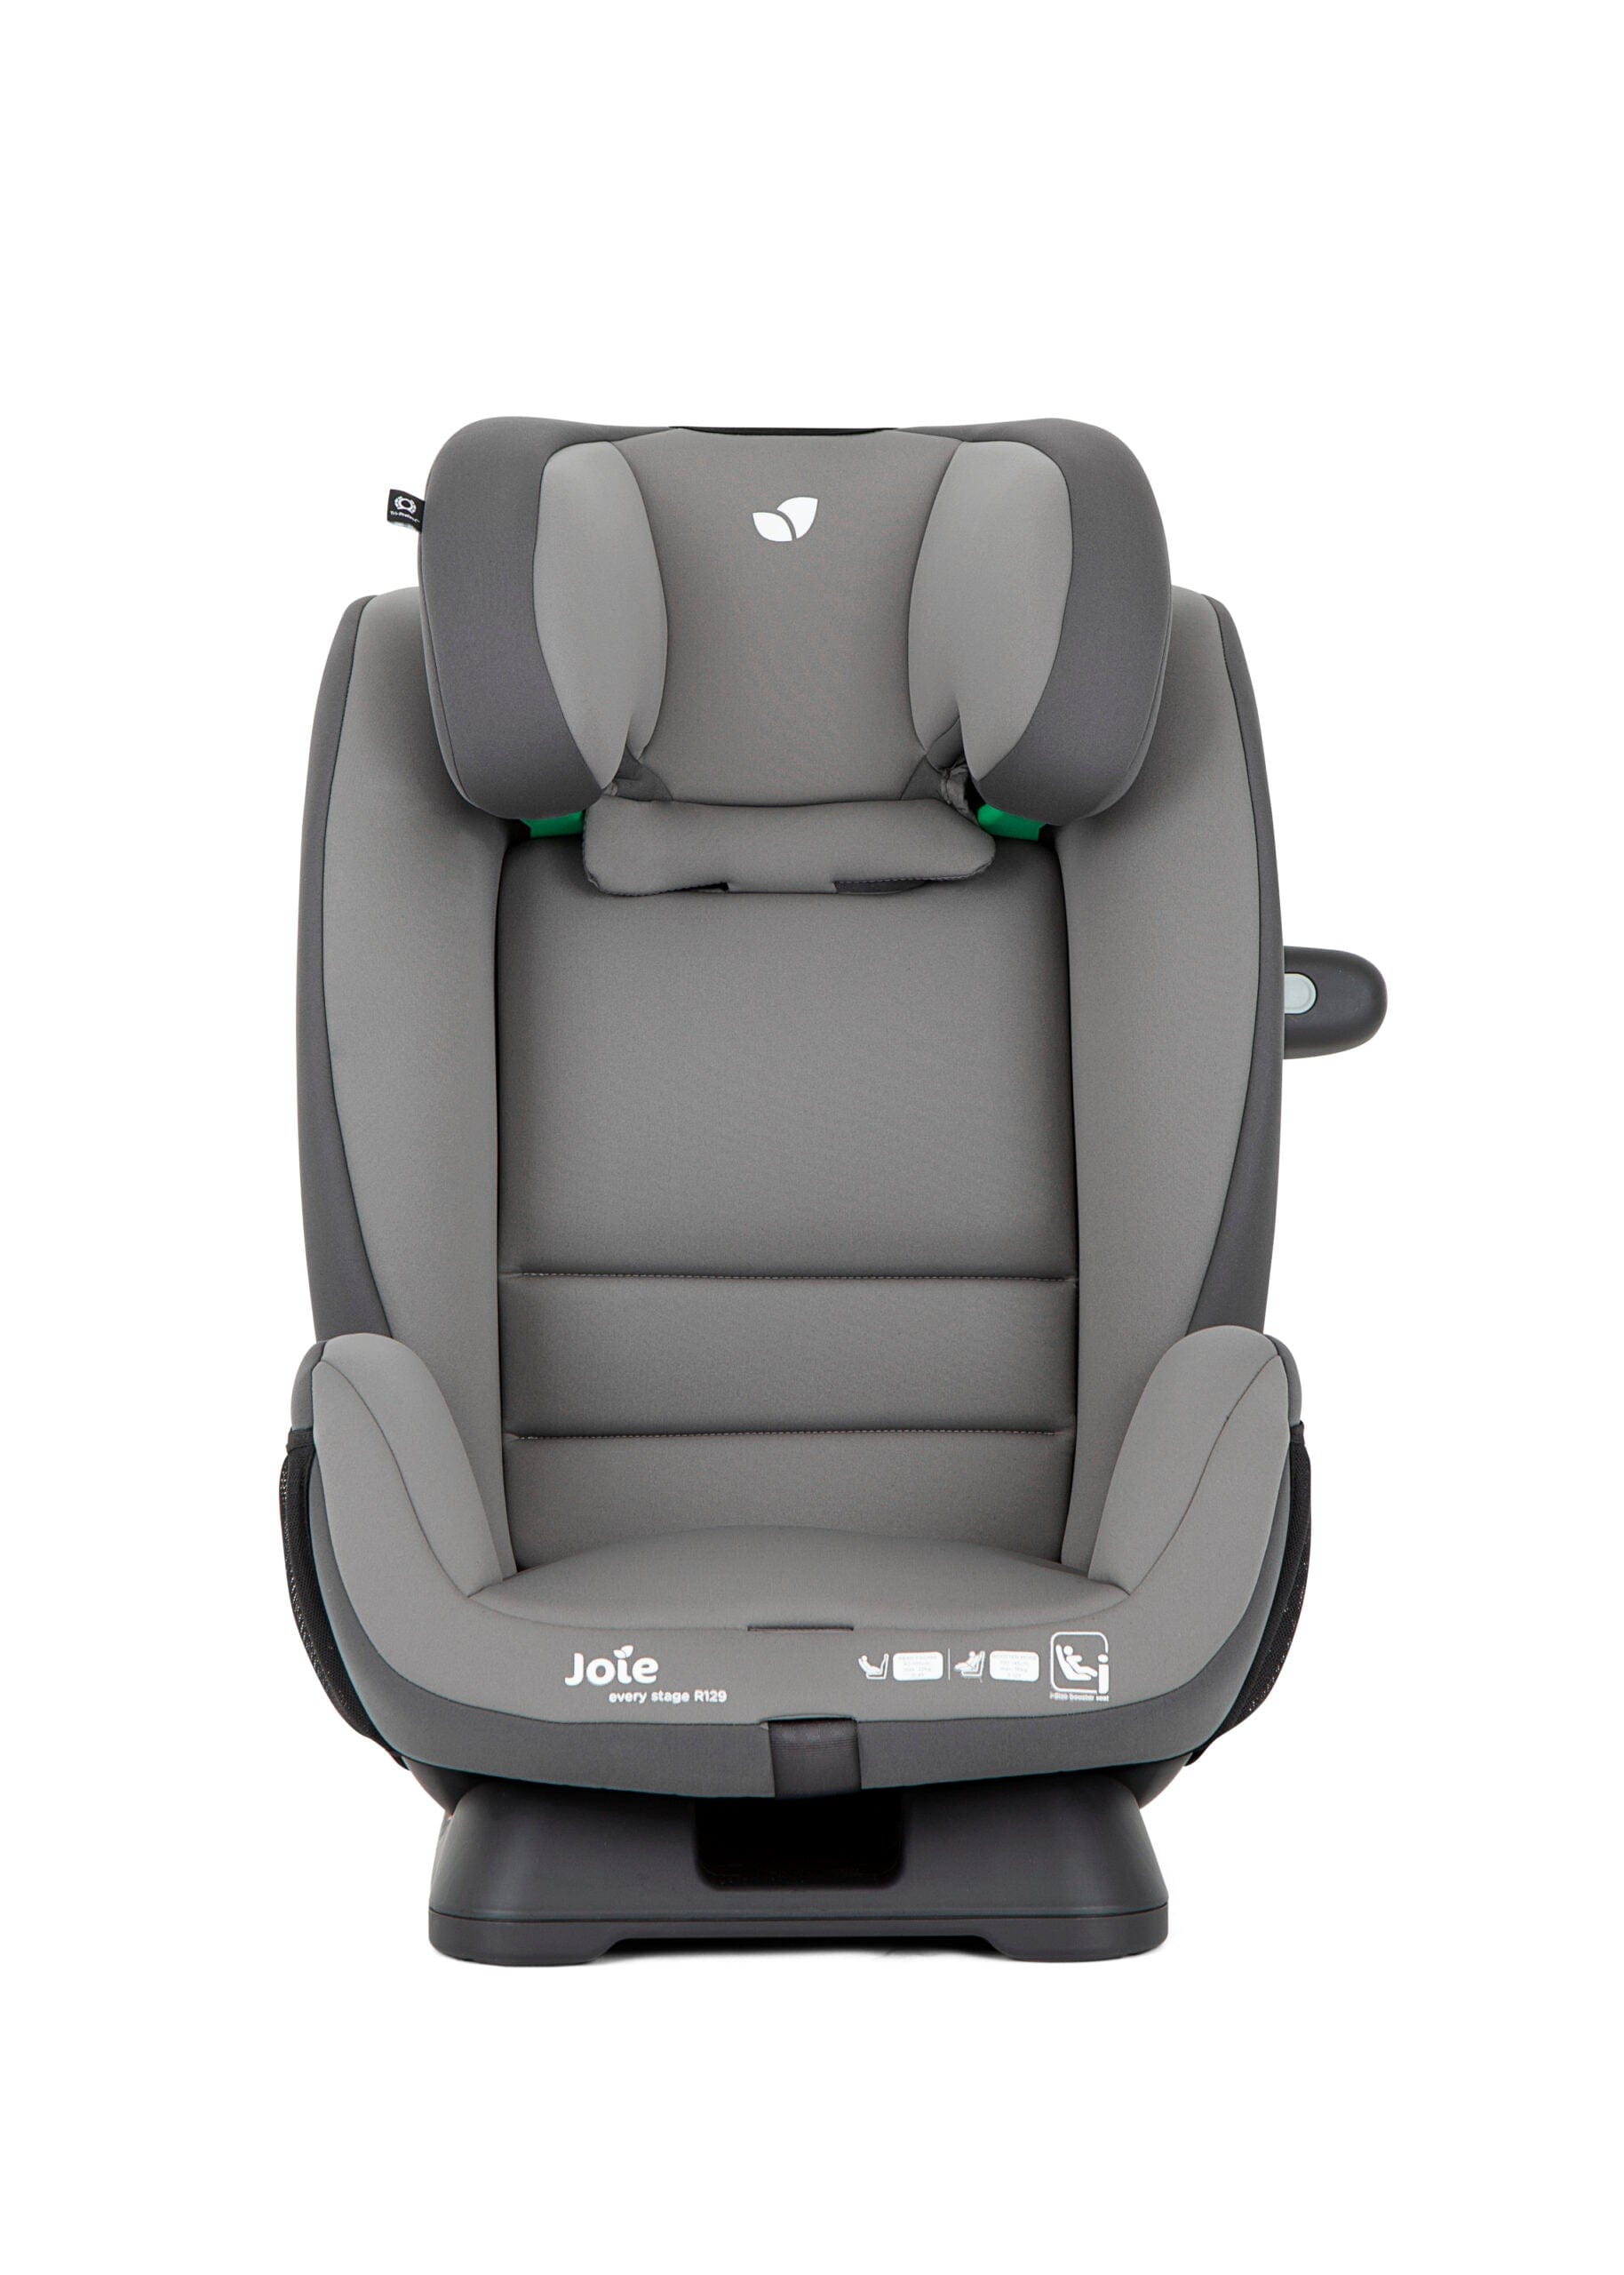 Joie combination car seats Every Stage R129 - Cobblestone C2117AACBL000